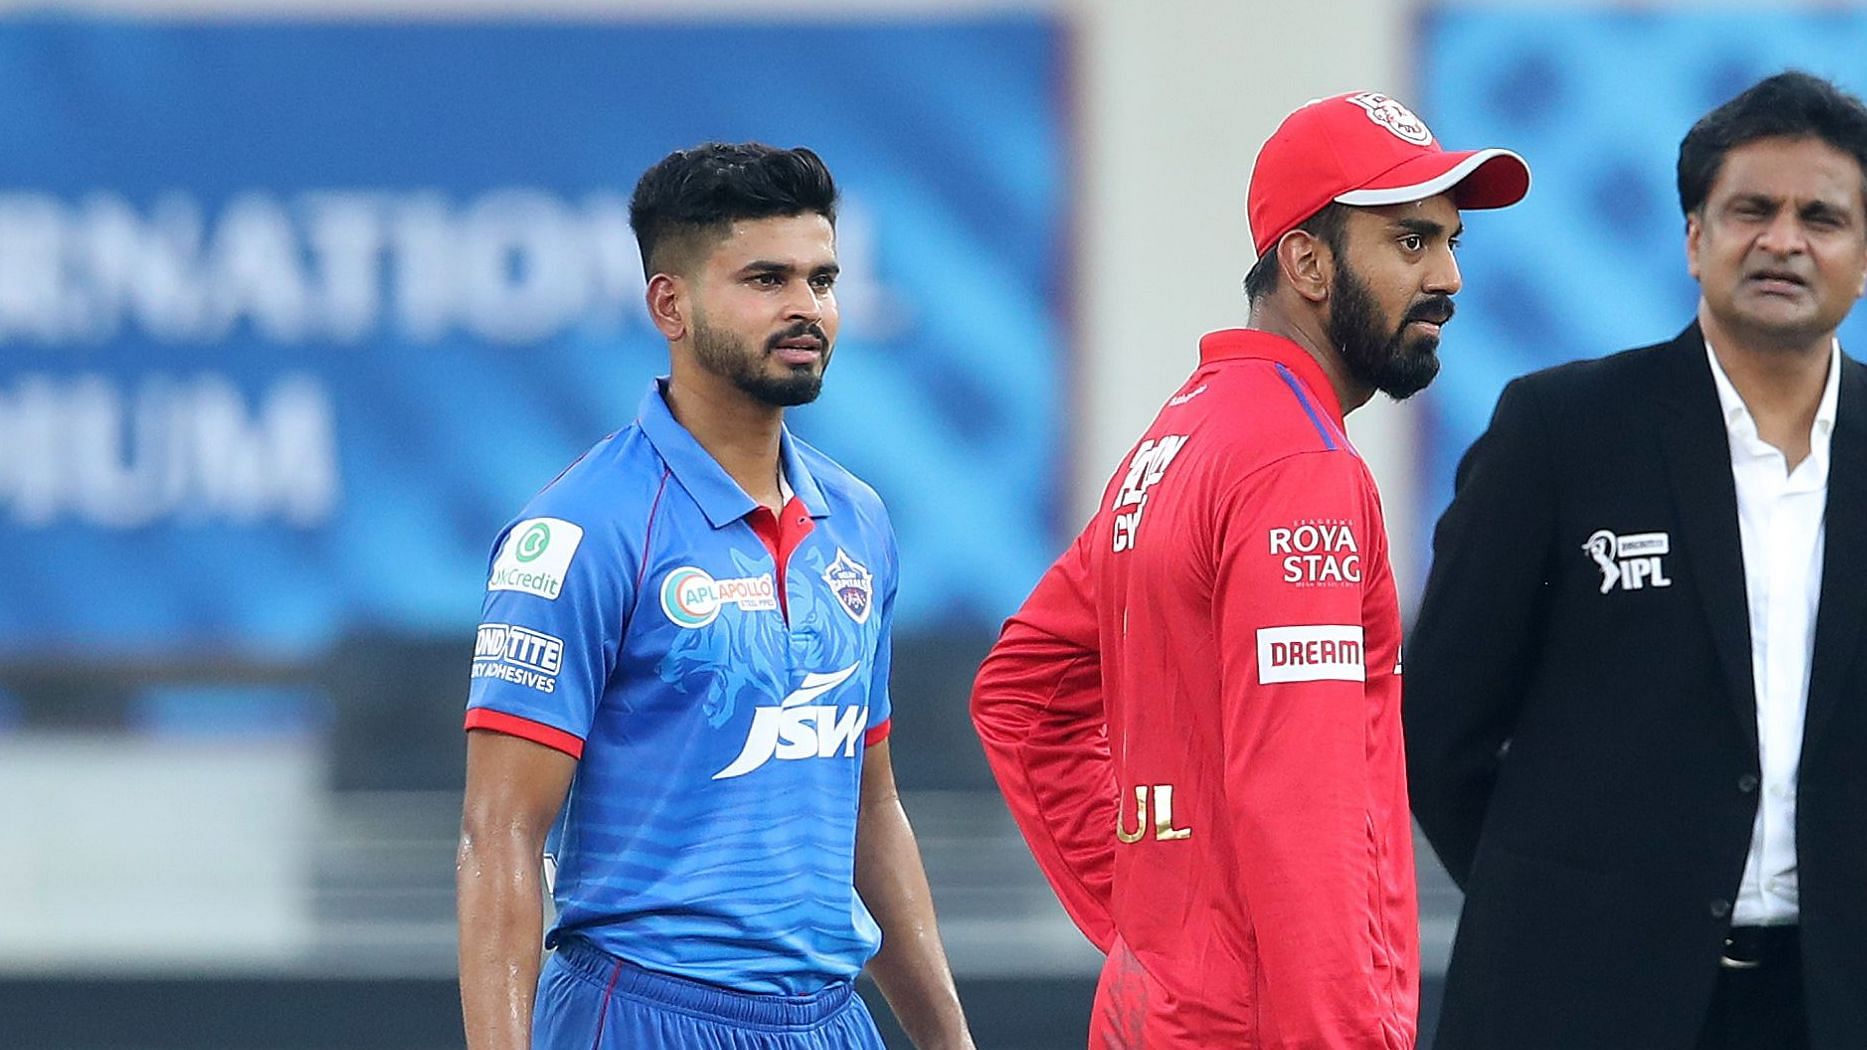 Shreyas Iyer, spoke at the toss about the roles of Ponting and Ganguly in him handling responsibility of captaincy